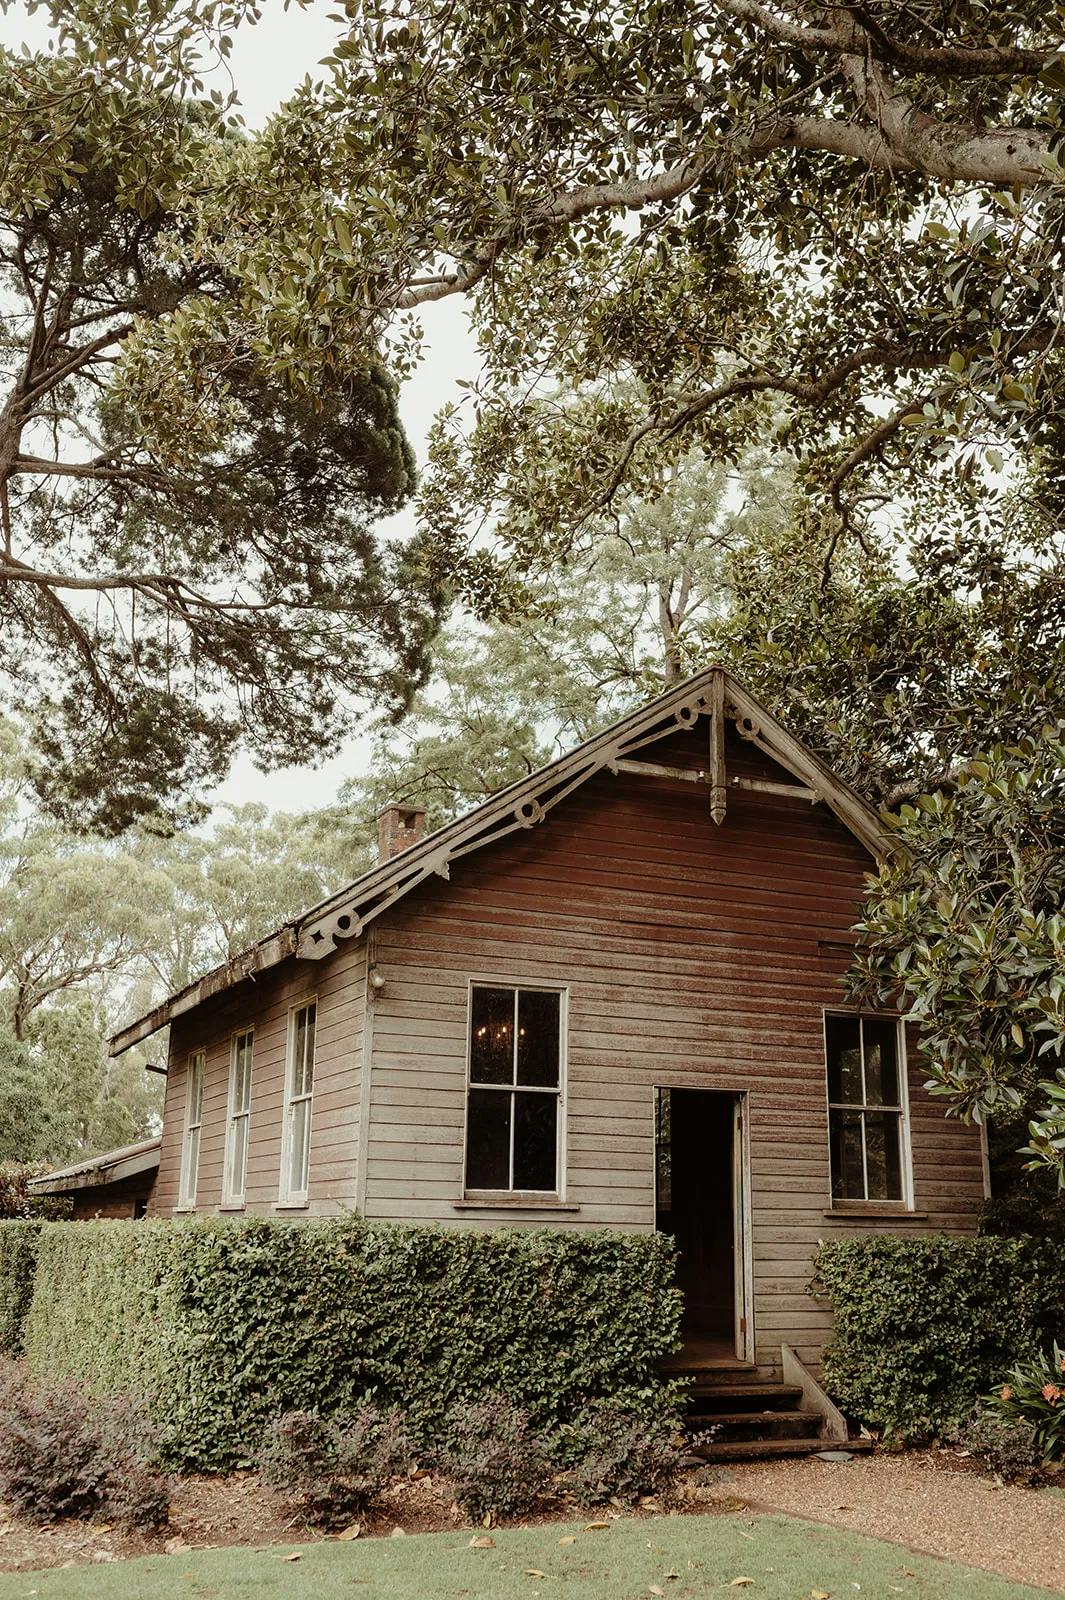 A rustic wooden house with a gabled roof, surrounded by lush greenery and trees. The house features multiple windows and an open door. Tall hedges and a lawn are in the foreground, and the overall scene looks peaceful and serene.